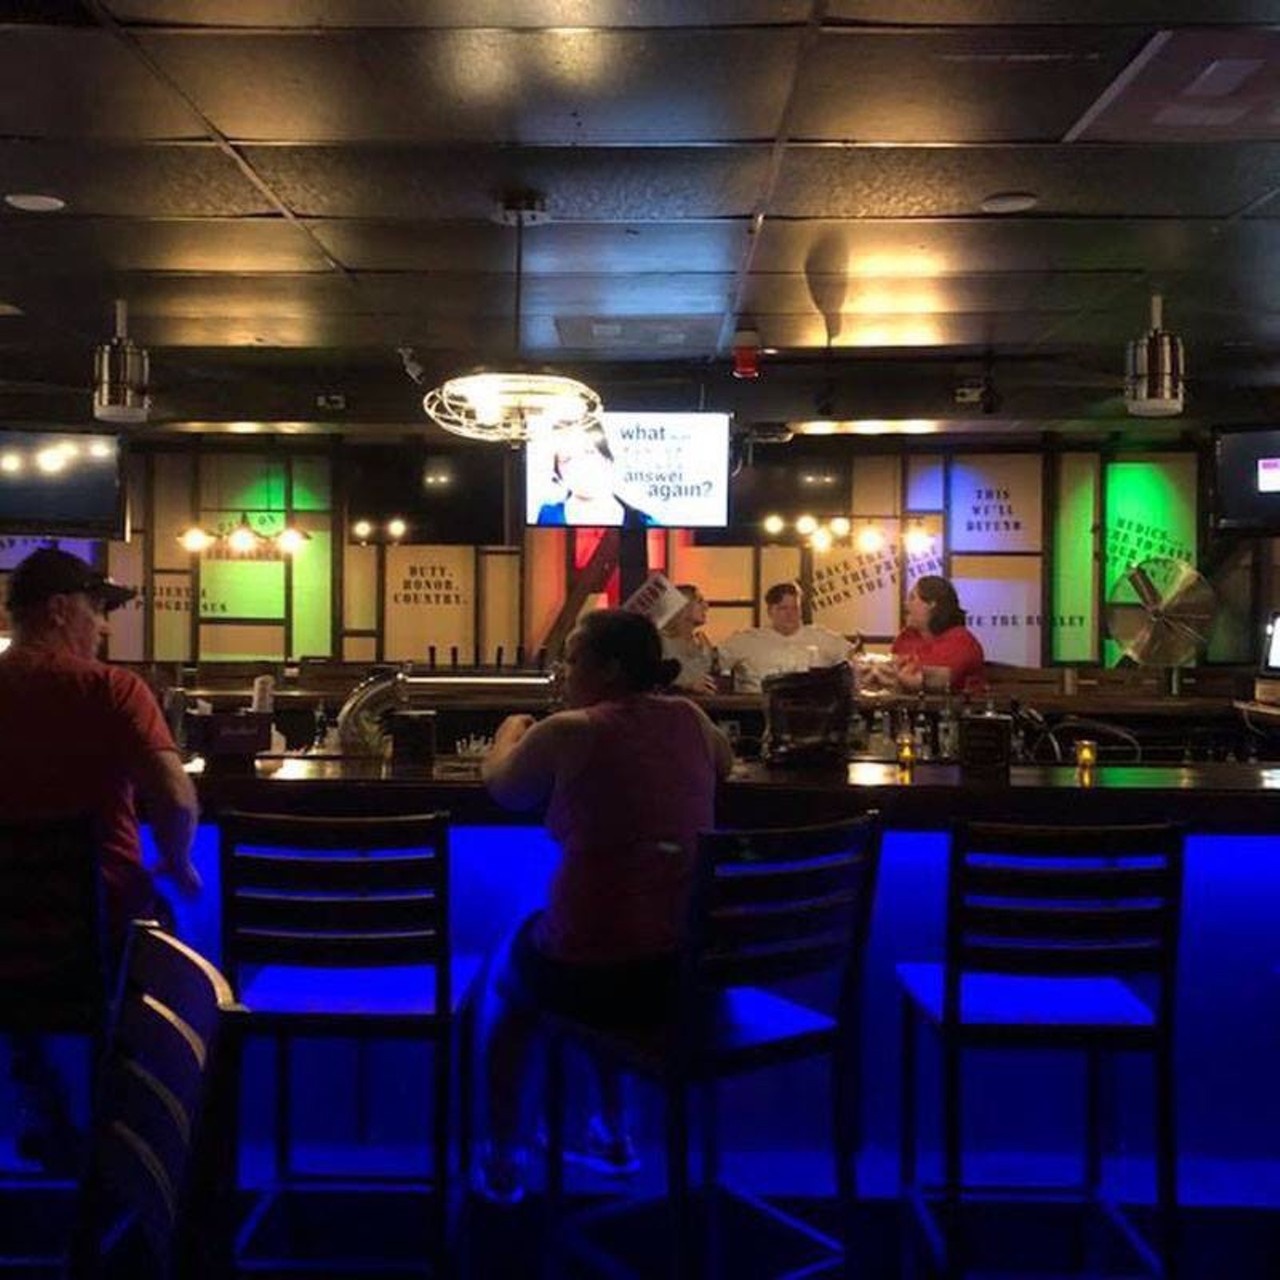 The Base Line
1139 Harry Wurzbach Road, (210) 930-6612, thebaselinebar.com
Whether you hang out near Fort Sam Houston or not, you’ll likely end up at this bar sooner or later. Previously known as the Recovery Room, The Base Line comes through with drink specials, pool, darts, shuffleboard, karaoke, trivia nights and even food. If it’s your first time here, be sure to order the Transfusion Shot.
Photo via Yelp / The Base Line